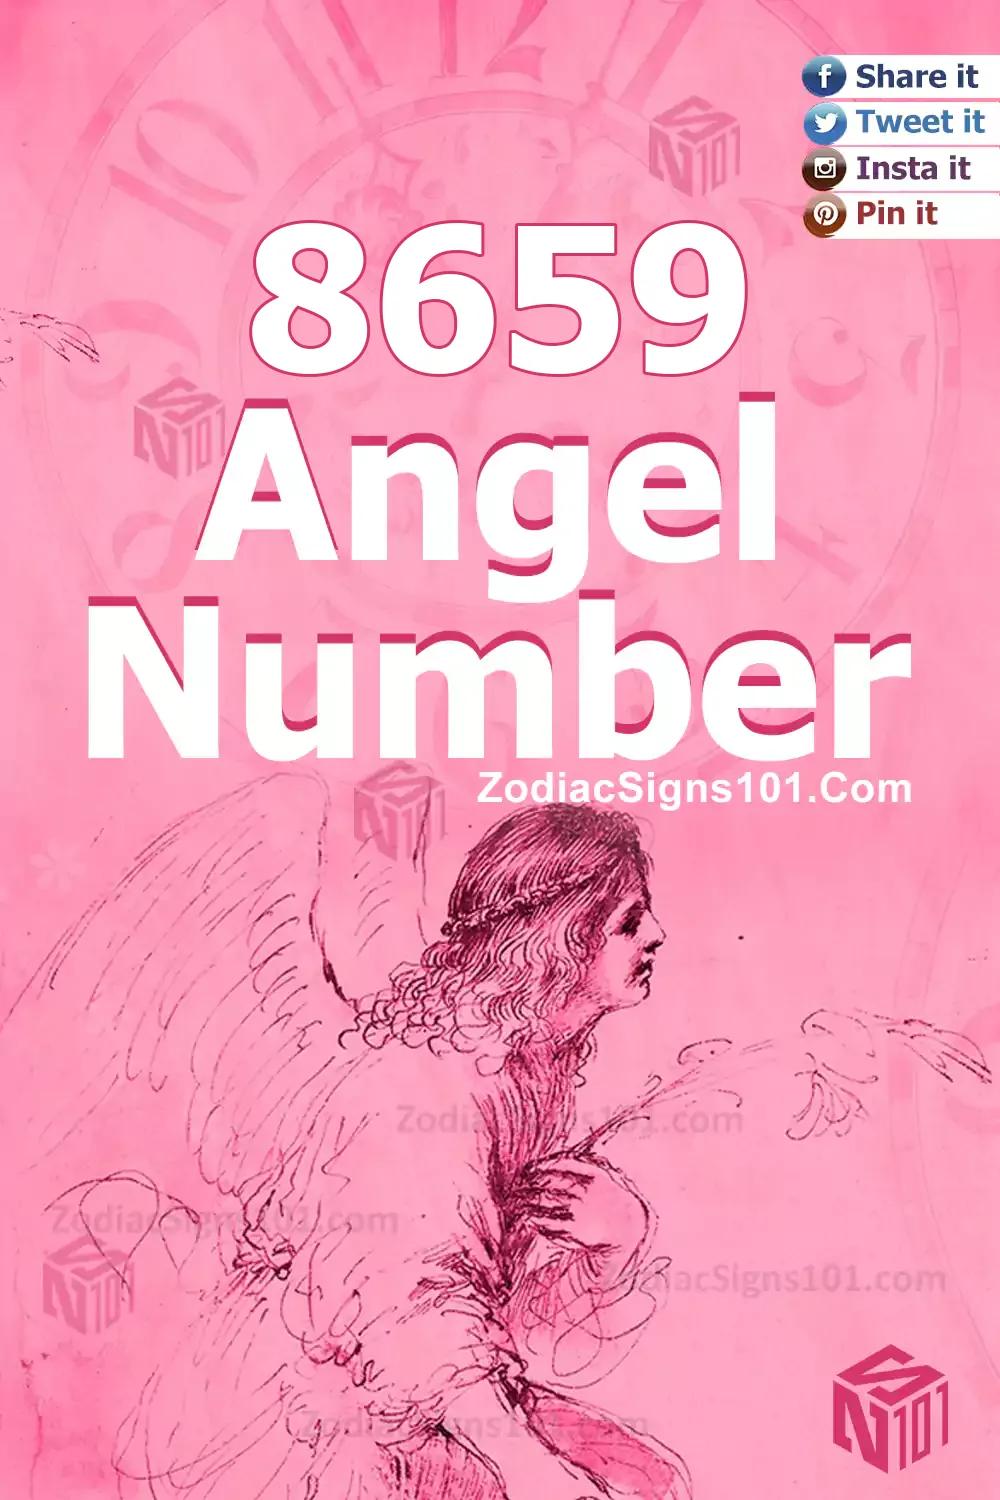 8659 Angel Number Meaning